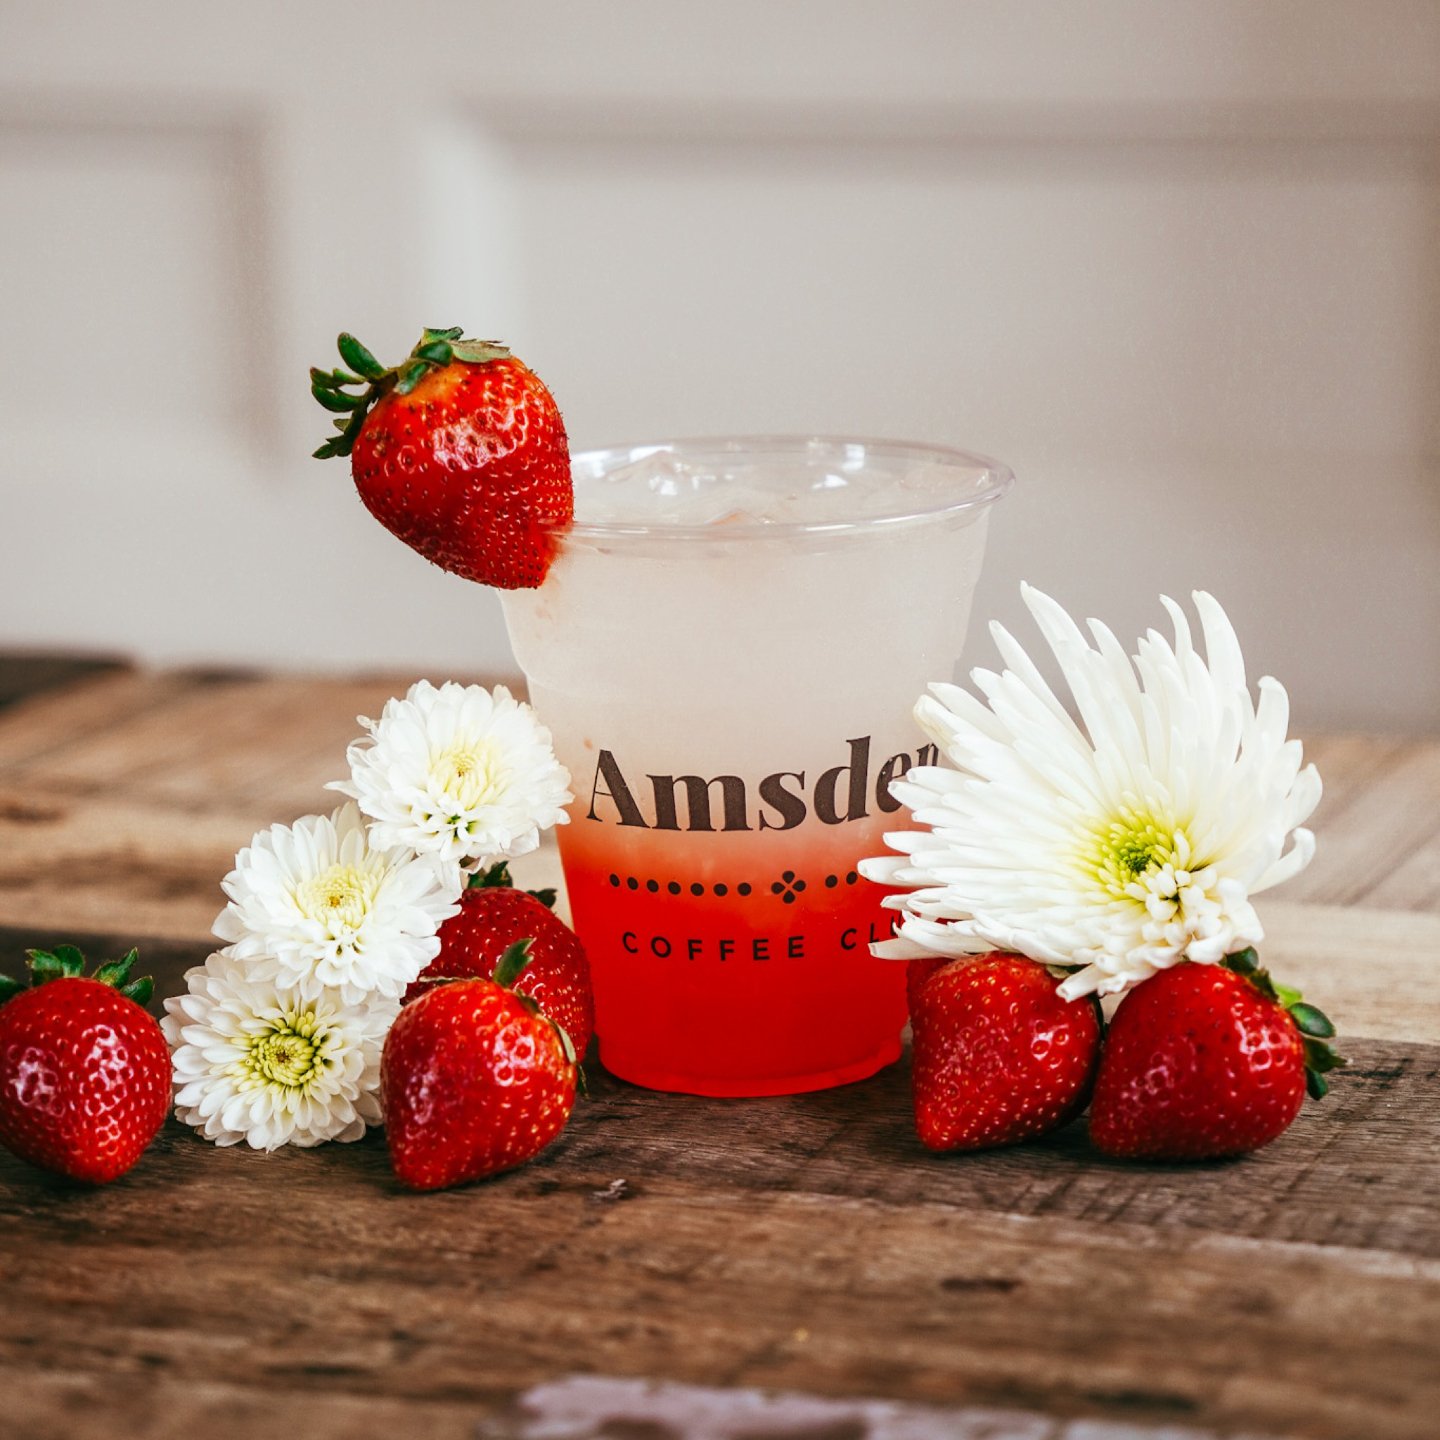 Sip into sunshine with our refreshing Strawberry Lemonade! 🍓🍋 Perfect for those days when you need a burst of fruity goodness to brighten your mood. Get ready to pucker up and taste the sweetness of summer in every sip! ☀️

#theamsden #amsden #amsd